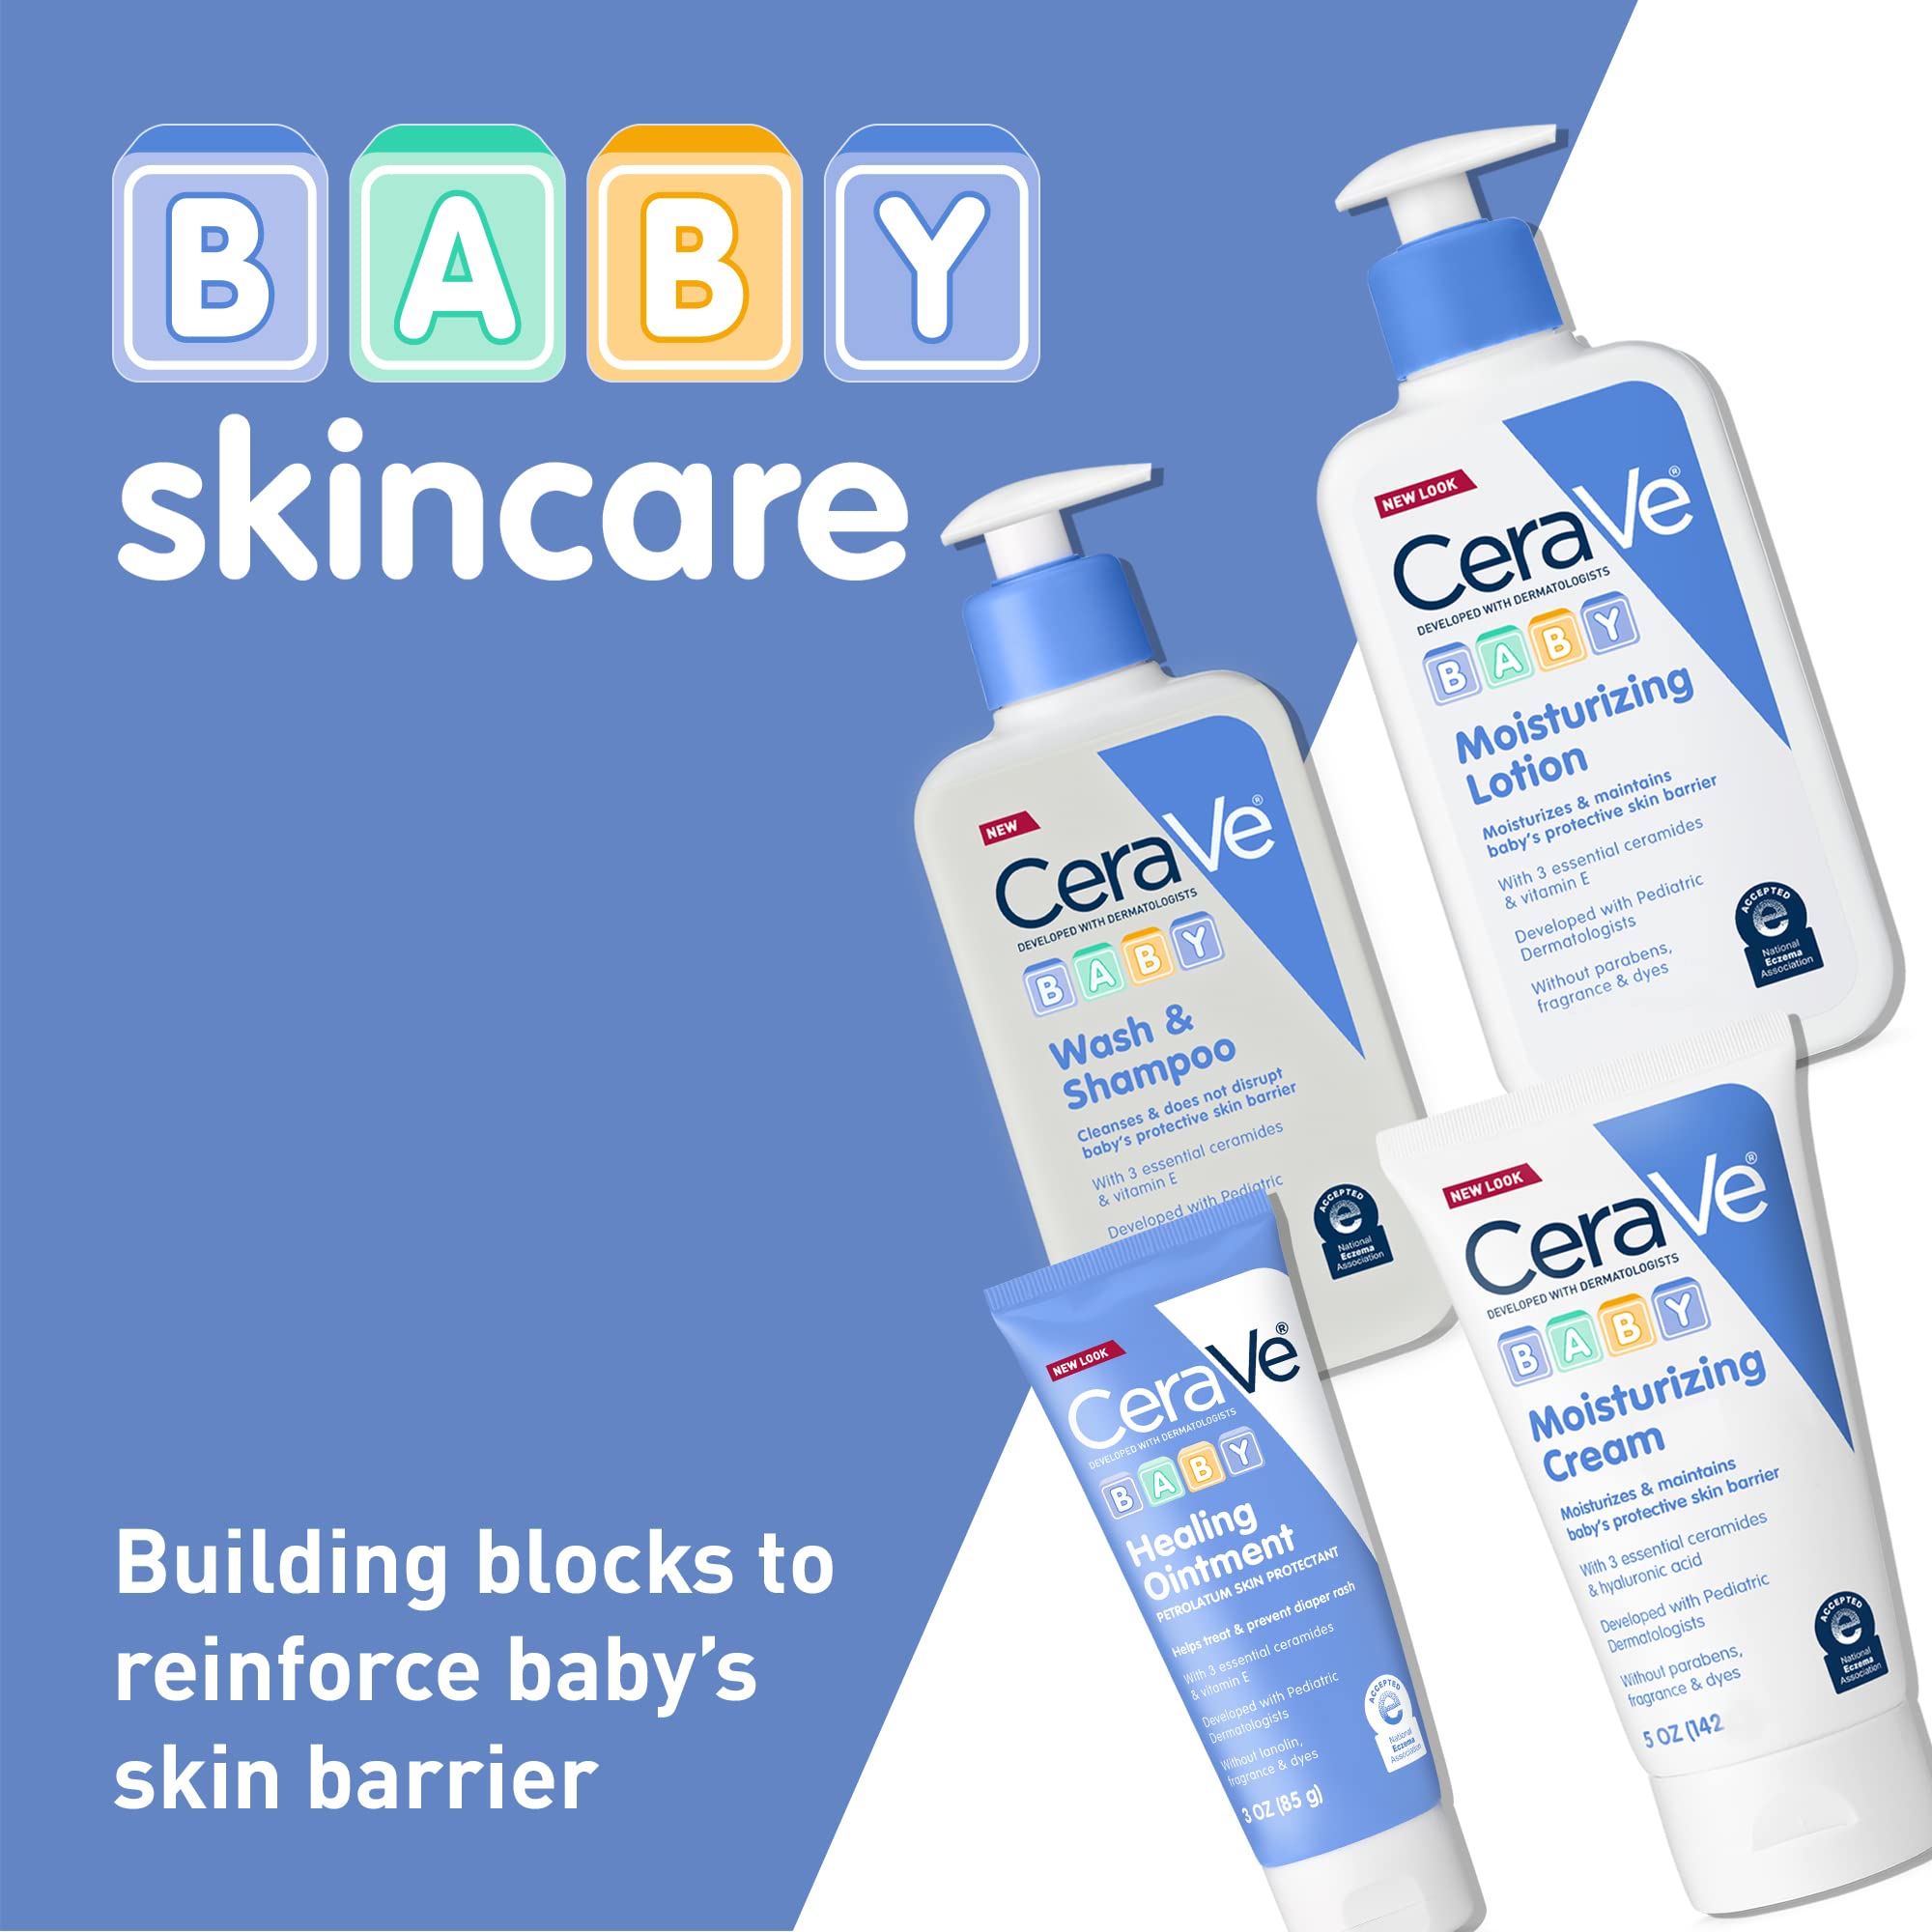 CeraVe Baby Wash & Shampoo | 2-in-1 Tear-Free for Skin Hair Fragrance, Paraben, Dye, Phthalates Sulfate Free Bath| Soap with Vitamin E 16 Ounce